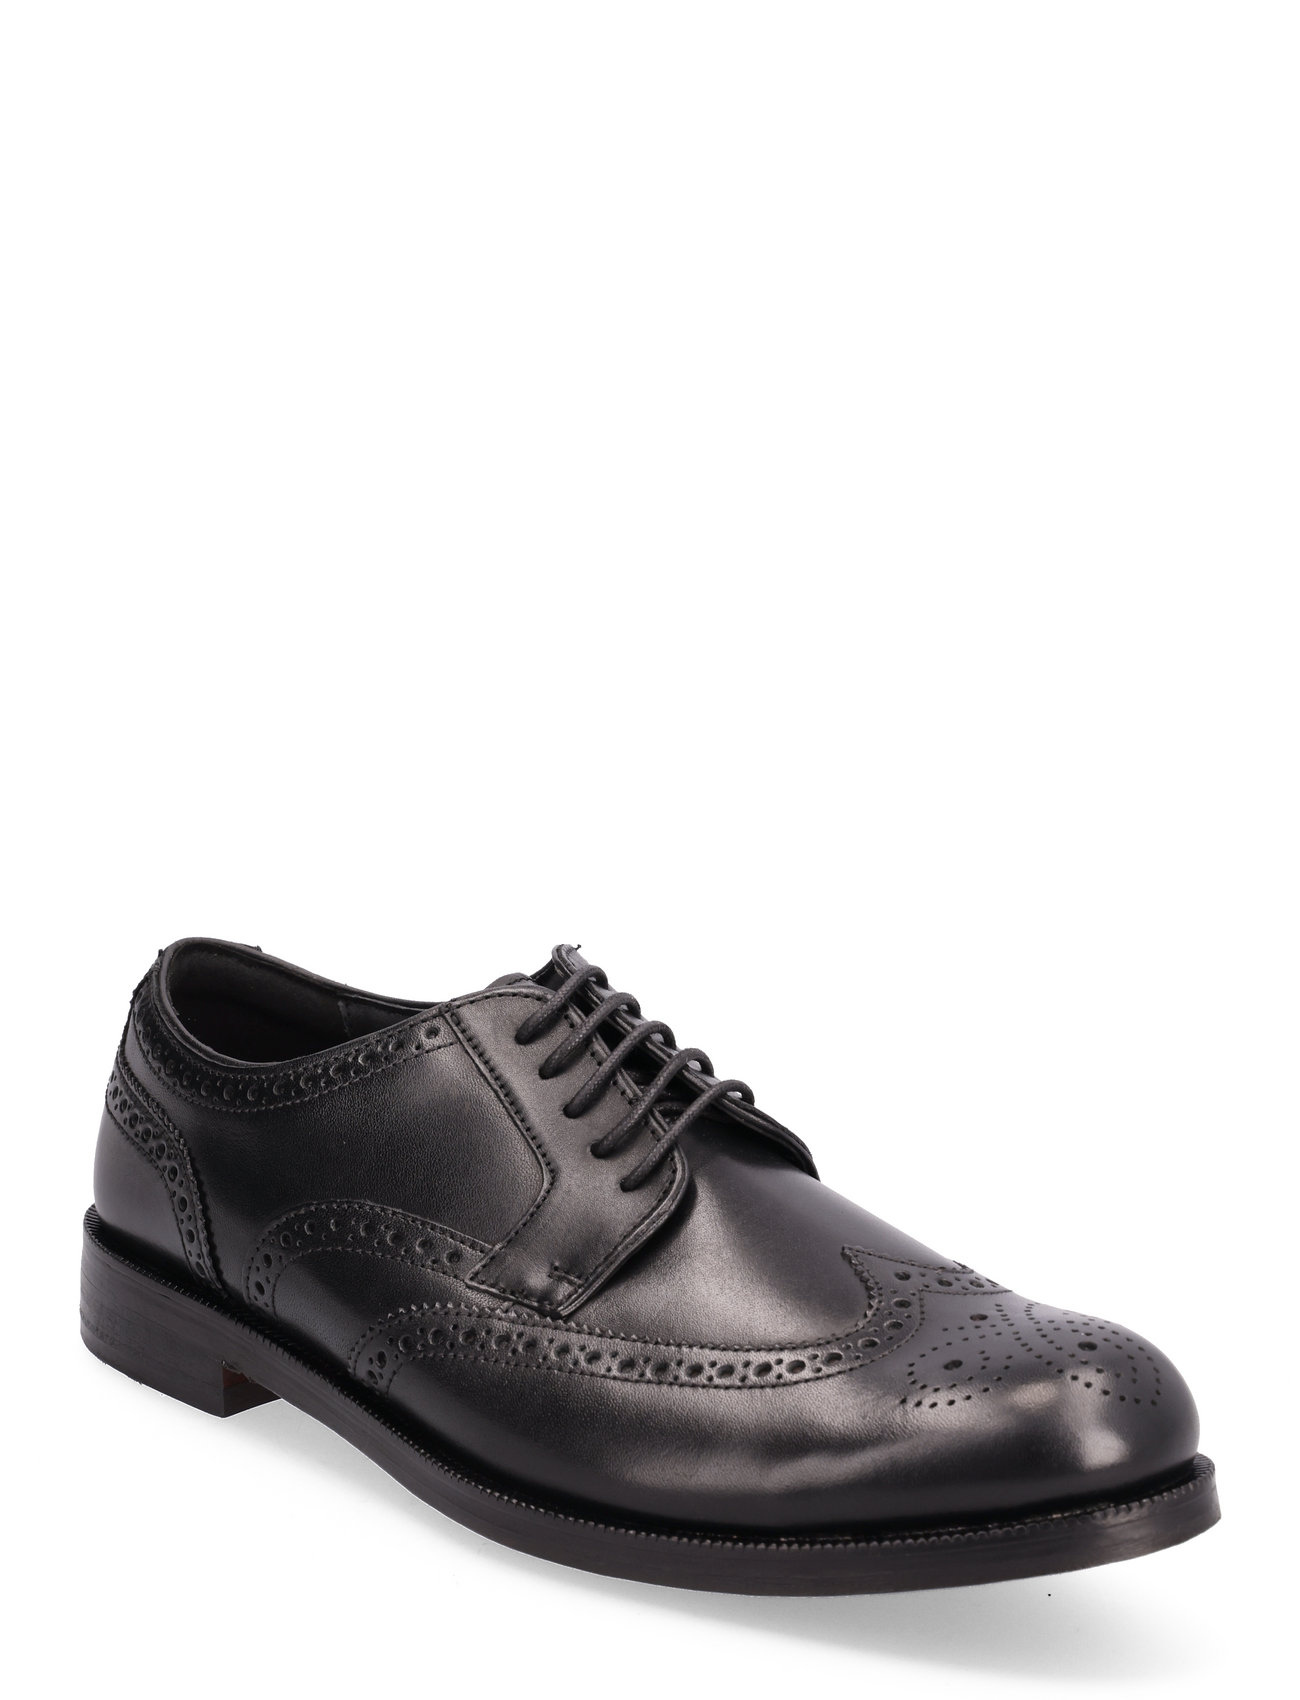 Clarks Craftdean Wing - Business shoes - Boozt.com